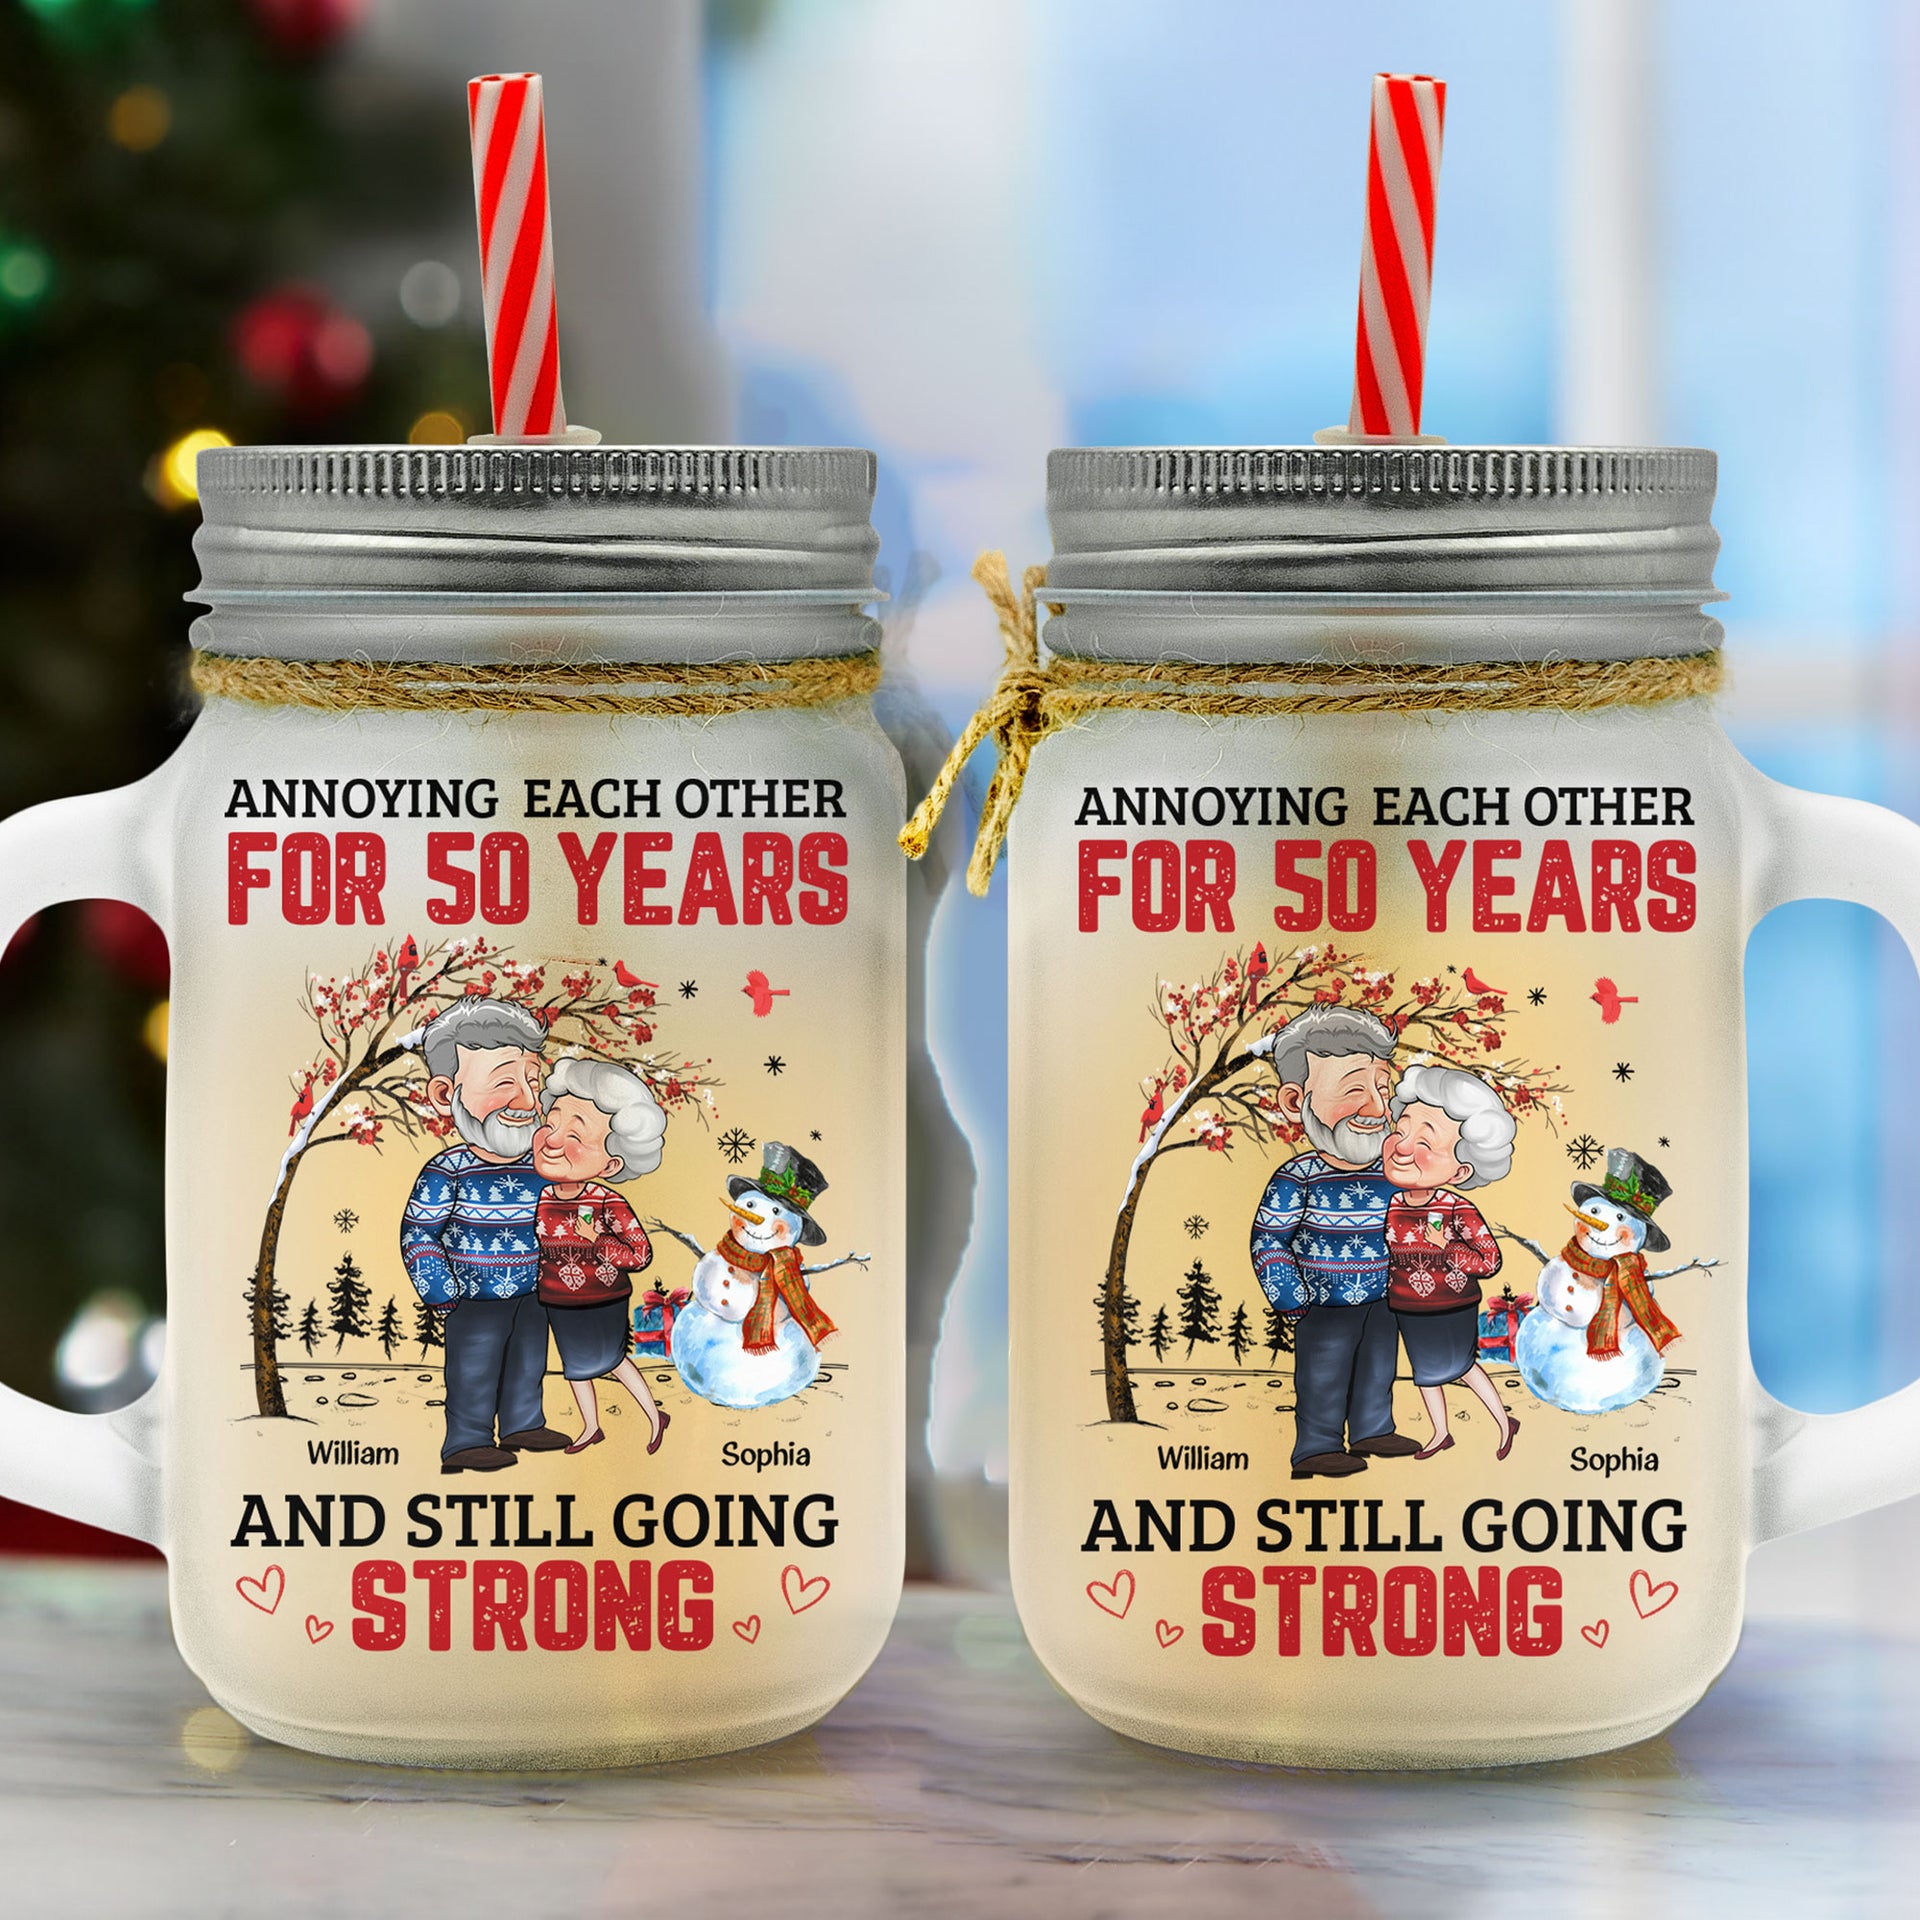 https://macorner.co/cdn/shop/files/Old-Couples-Annoying-Each-Other-And-Still-Going-Strong-Personalized-Mason-Jar-Cup-With-Straw1.jpg?v=1693551701&width=1920